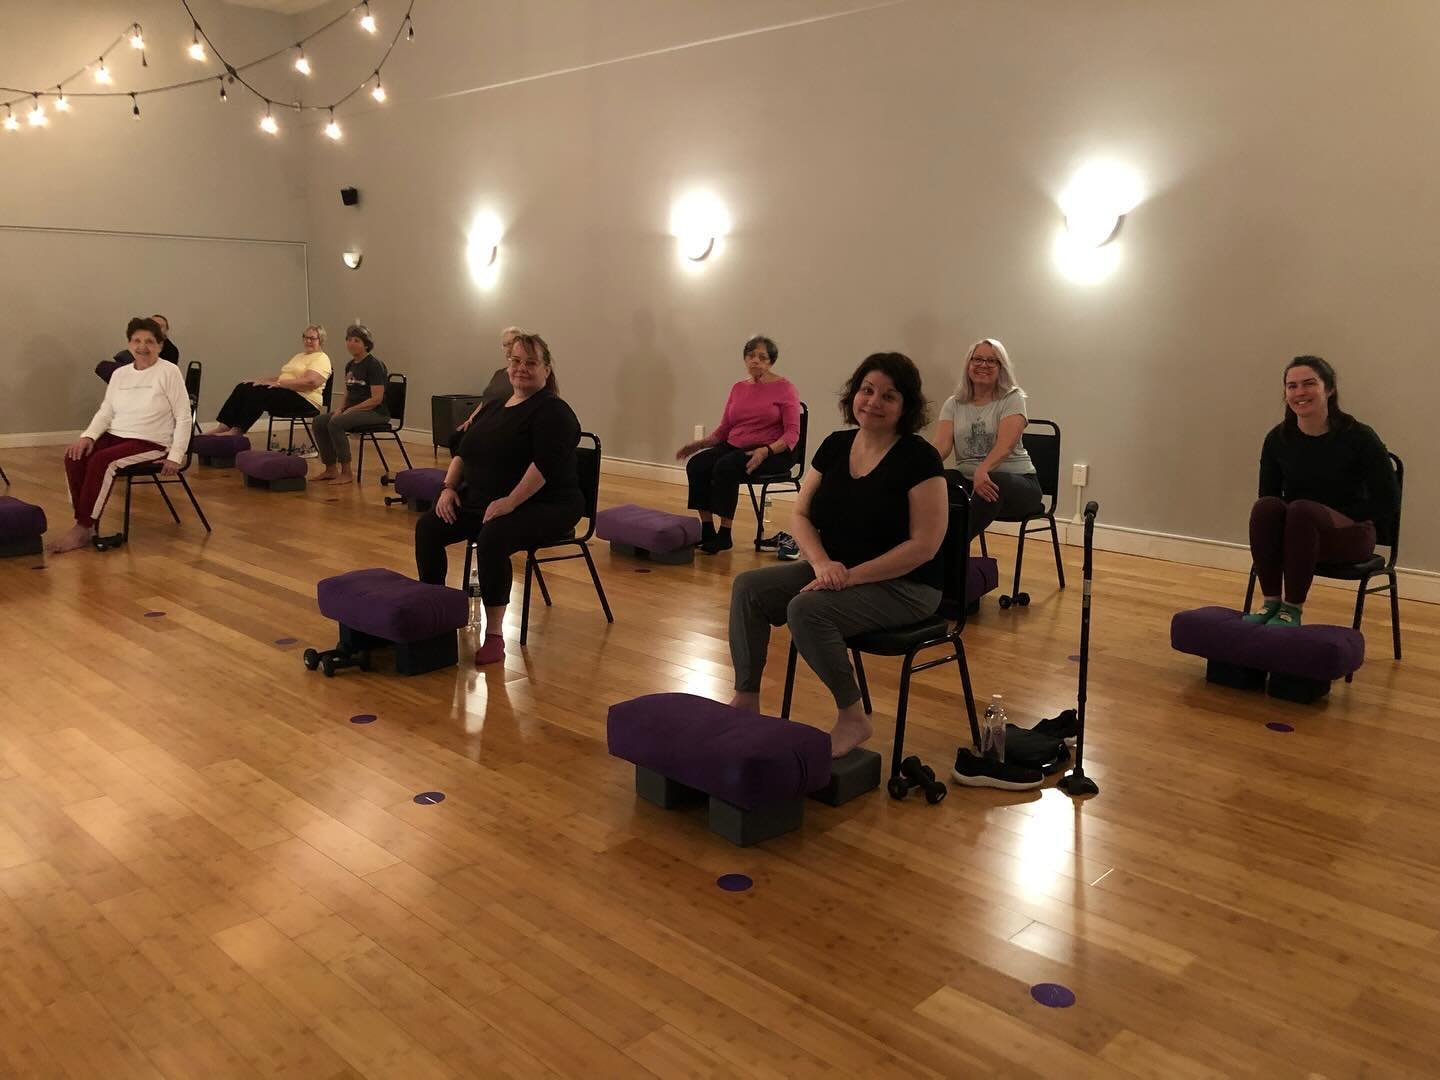 These wonderful chair yoga lovers raised $200 today to conclude our fundraiser for @yogareachesout. We appreciate and thank everyone who contributed! We surpassed our goal and could not be more grateful. 💜